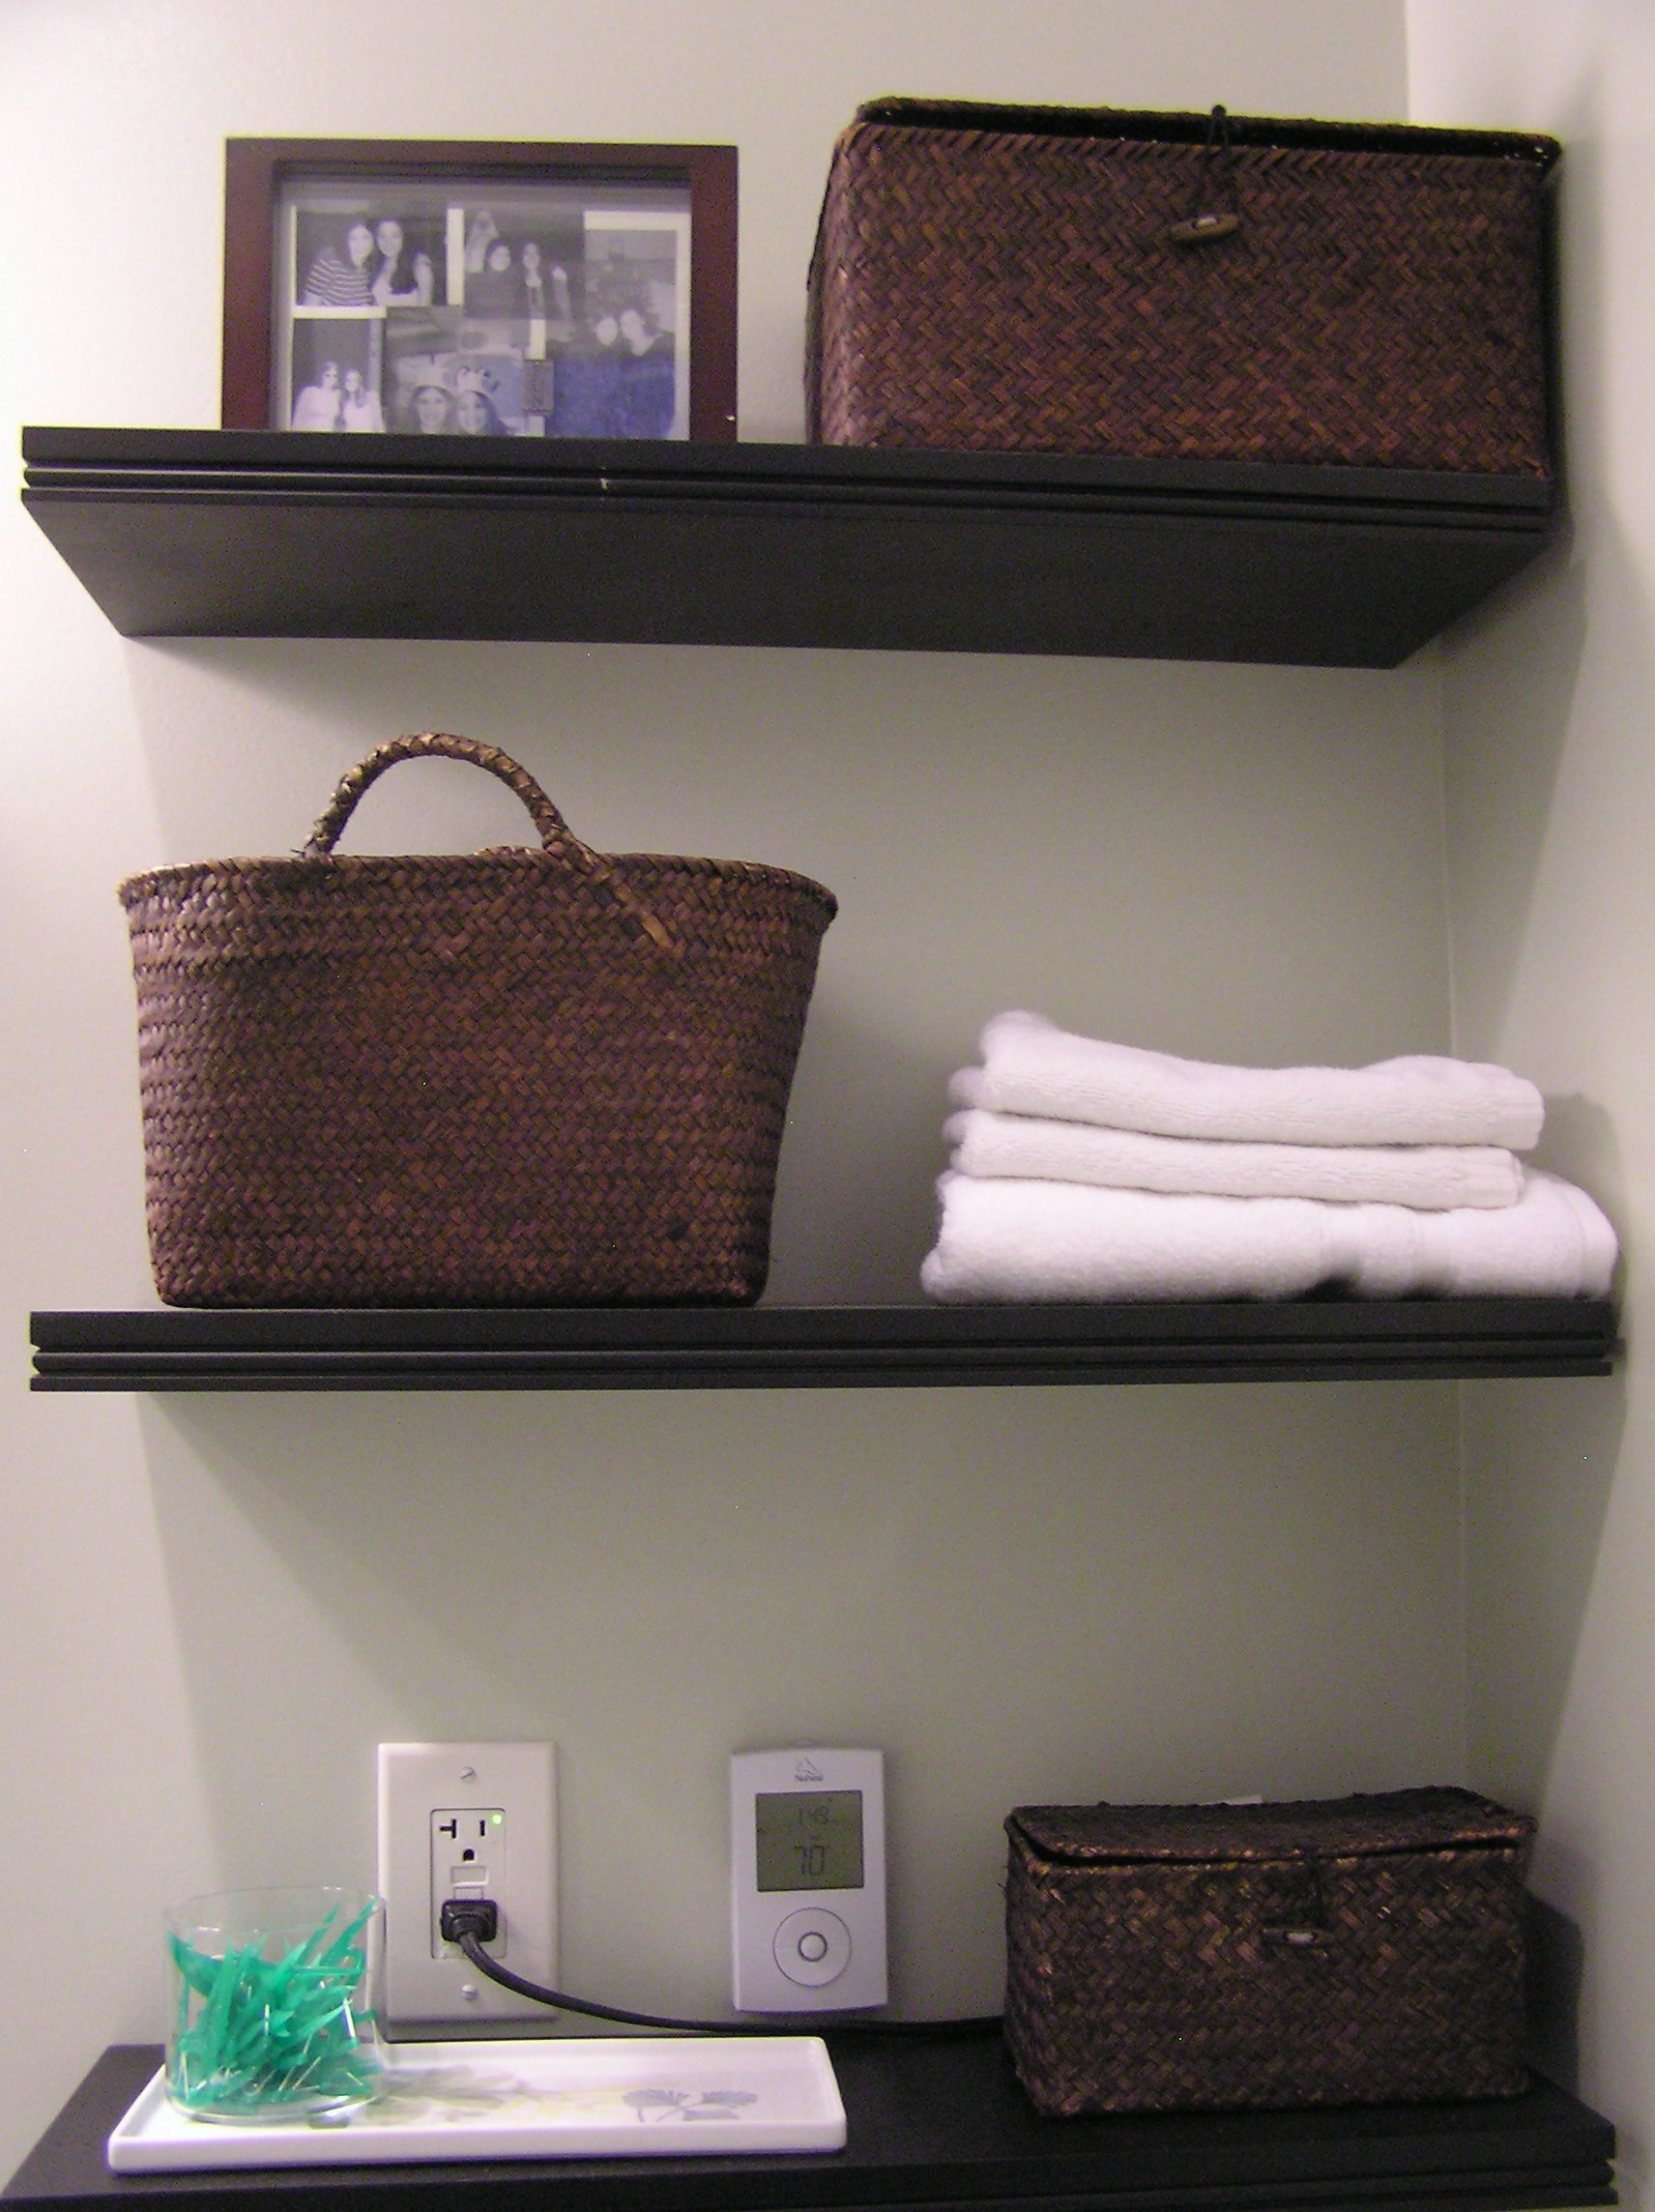 Bathroom Wall Cabinet With Baskets
 33 Bathroom Storage Hacks and Ideas That Will Enlarge Your